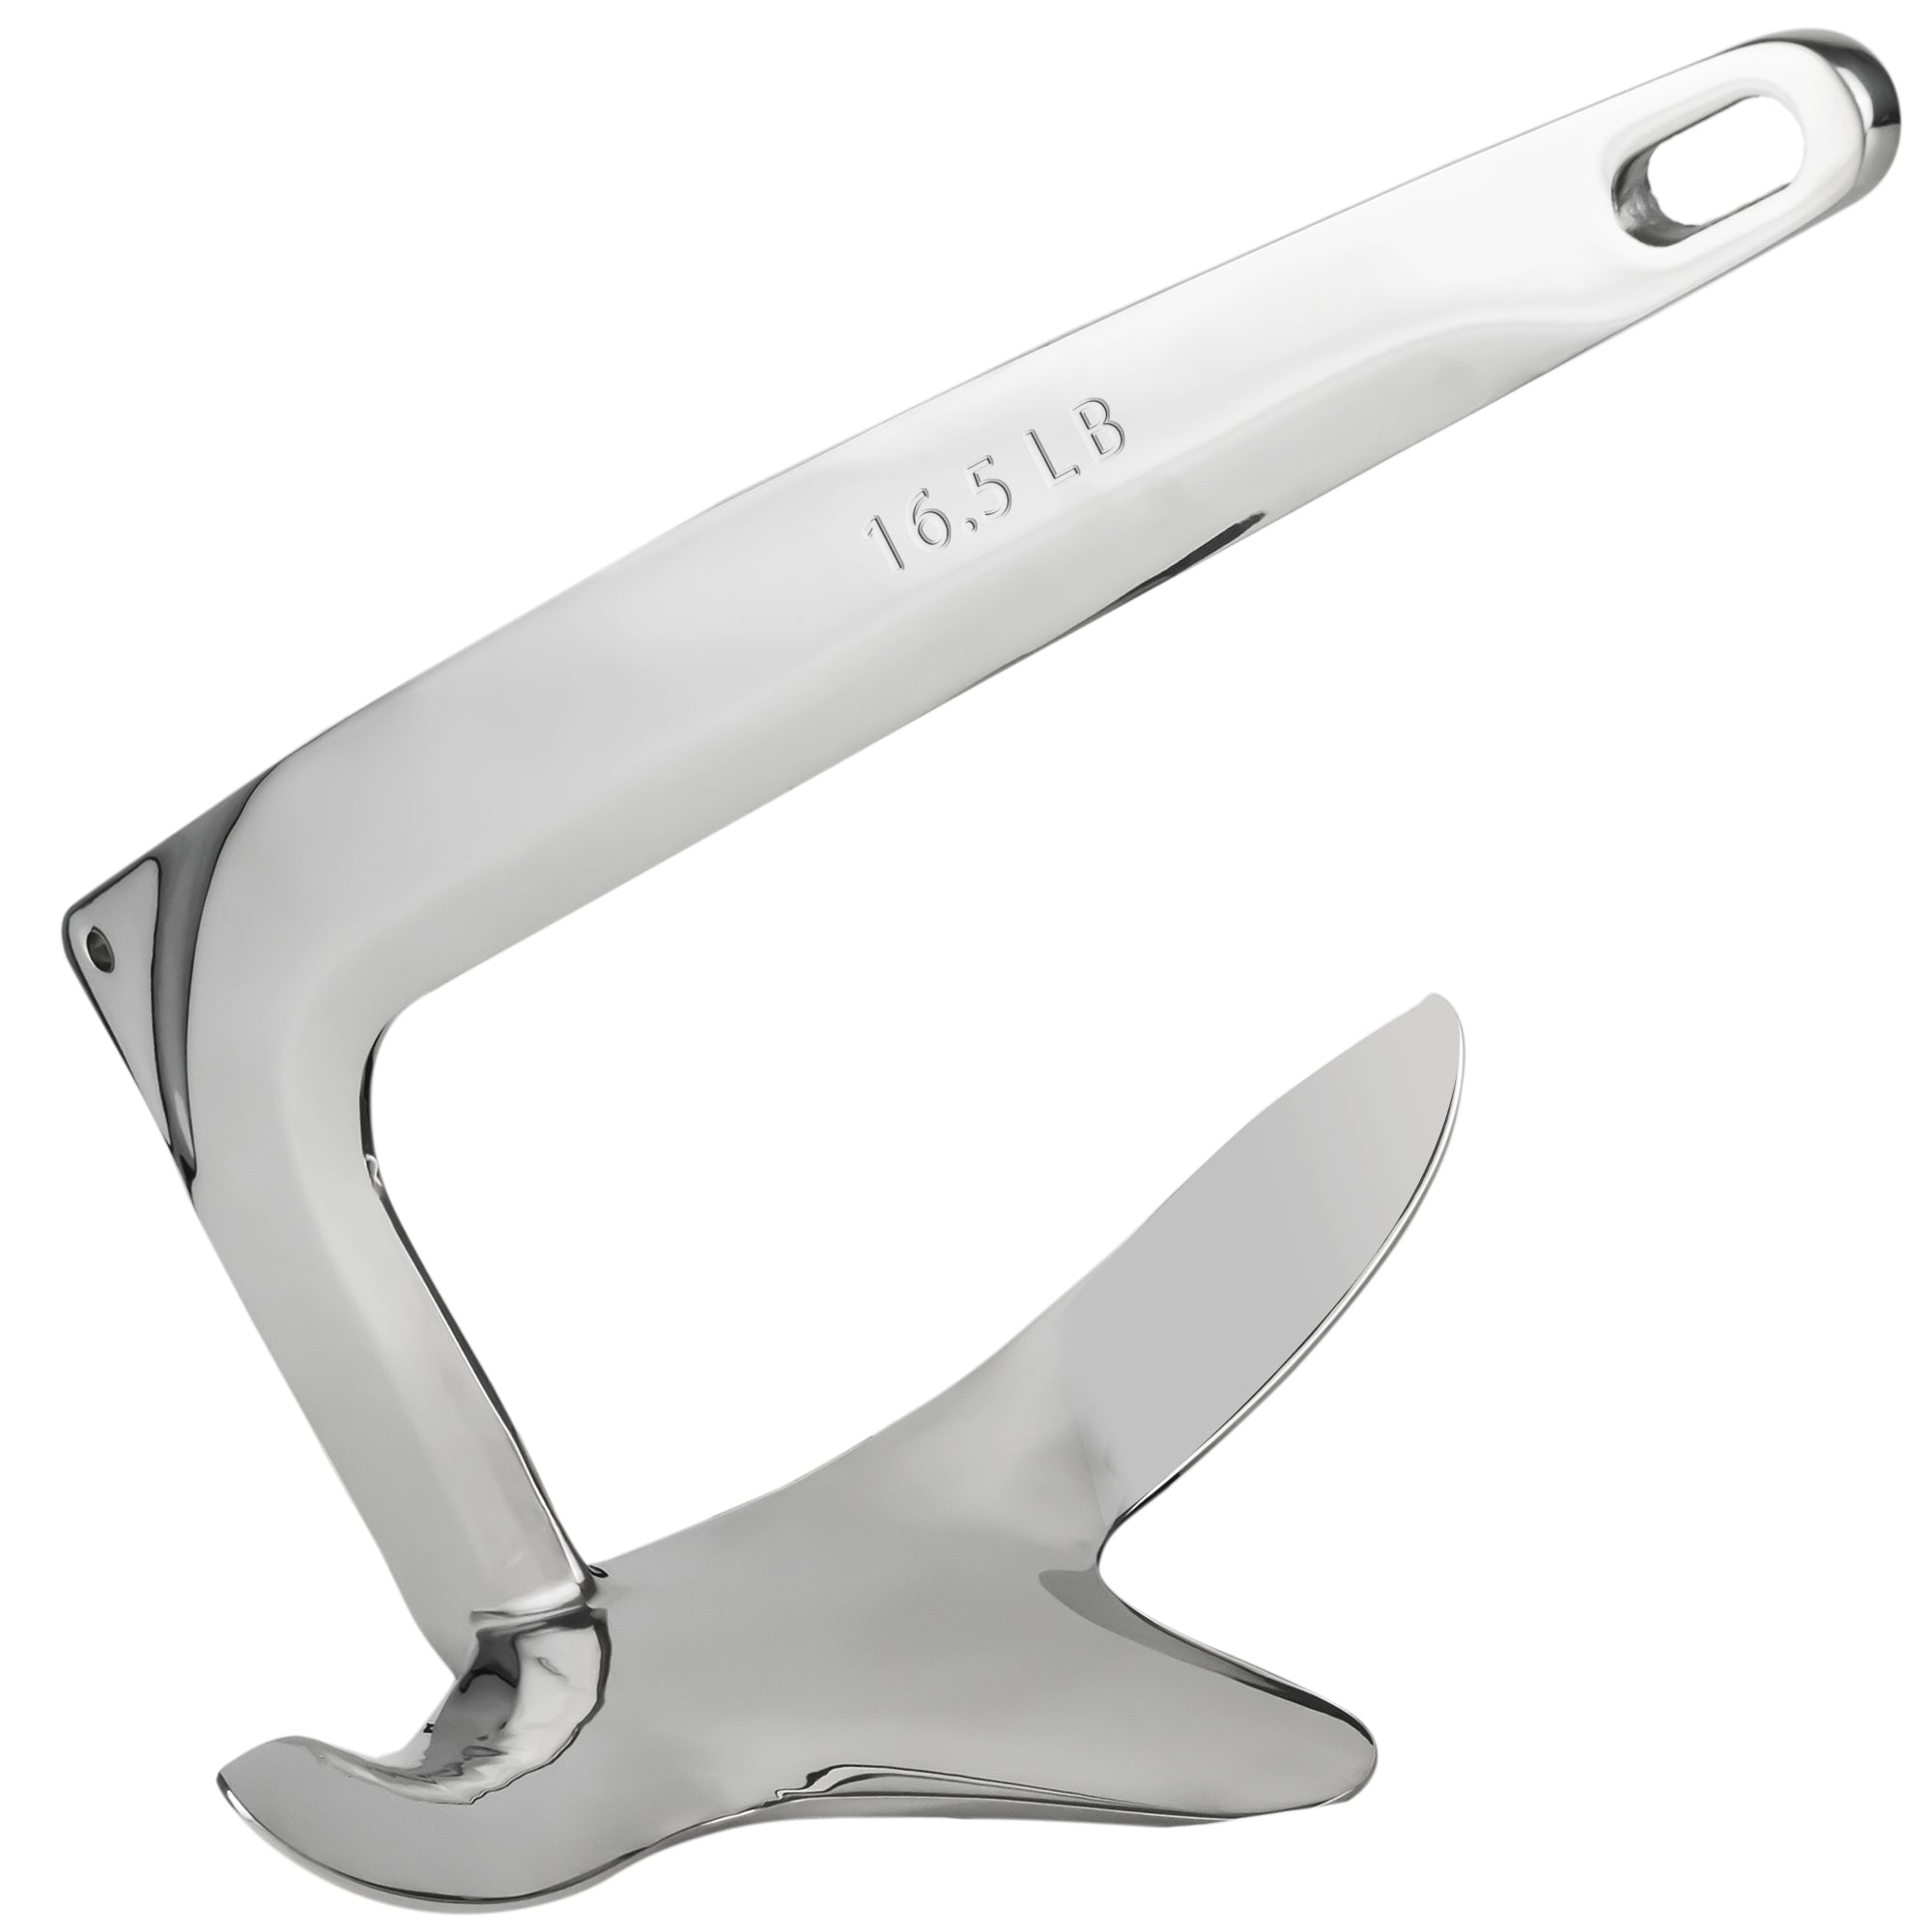 Bruce Style Claw Anchor, 16.5 Lb / 7.5 Kg, Stainless Steel - FO336